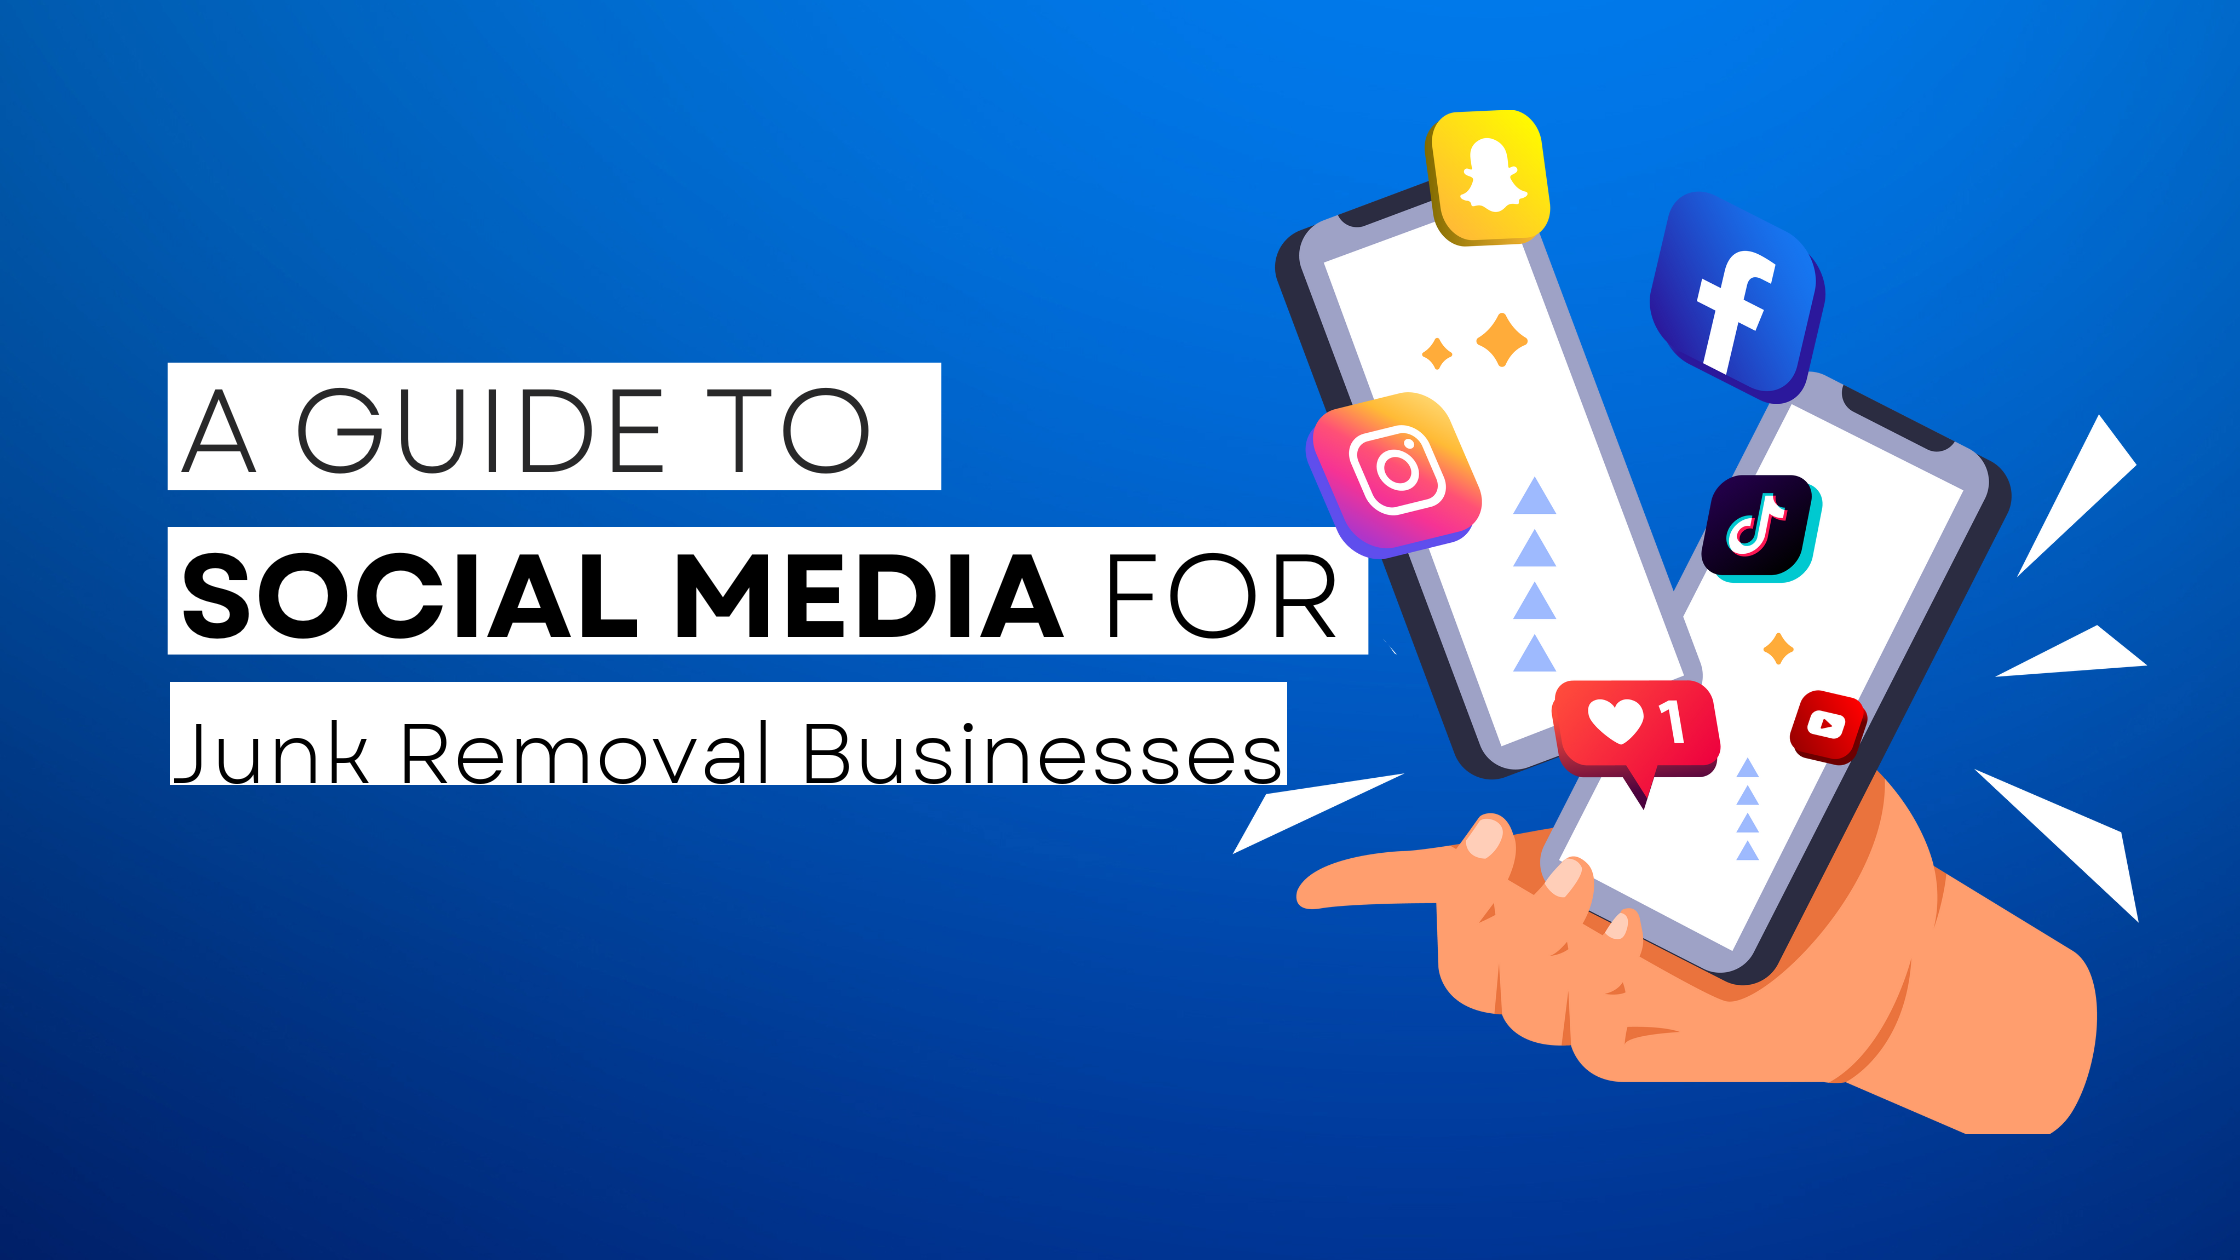 How to start Junk Removal  on social media